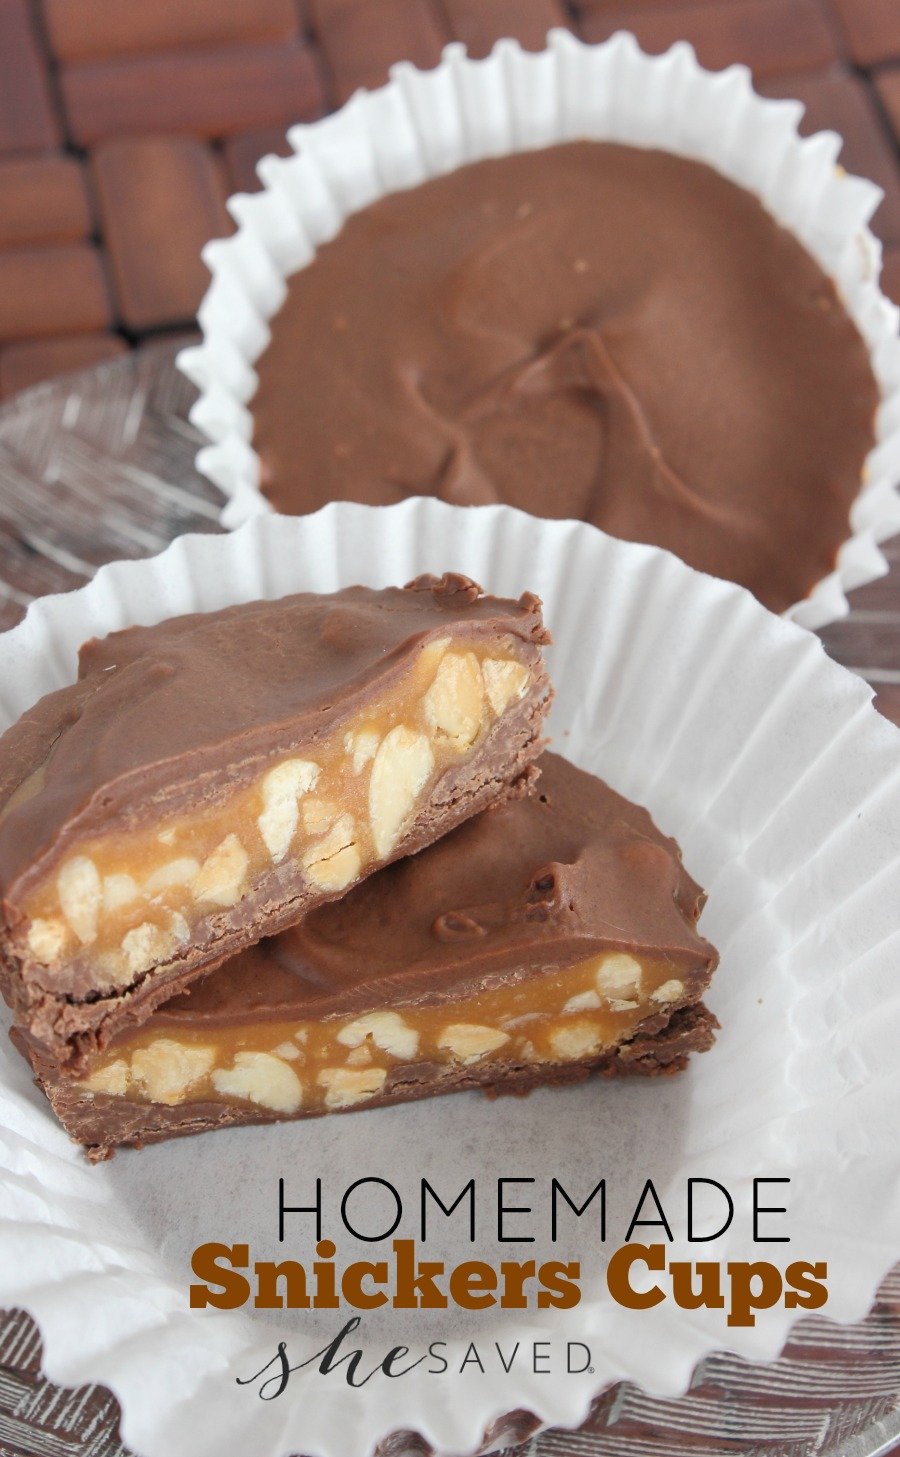 Make your own candy treats with this easy Homemade Snickers recipe!